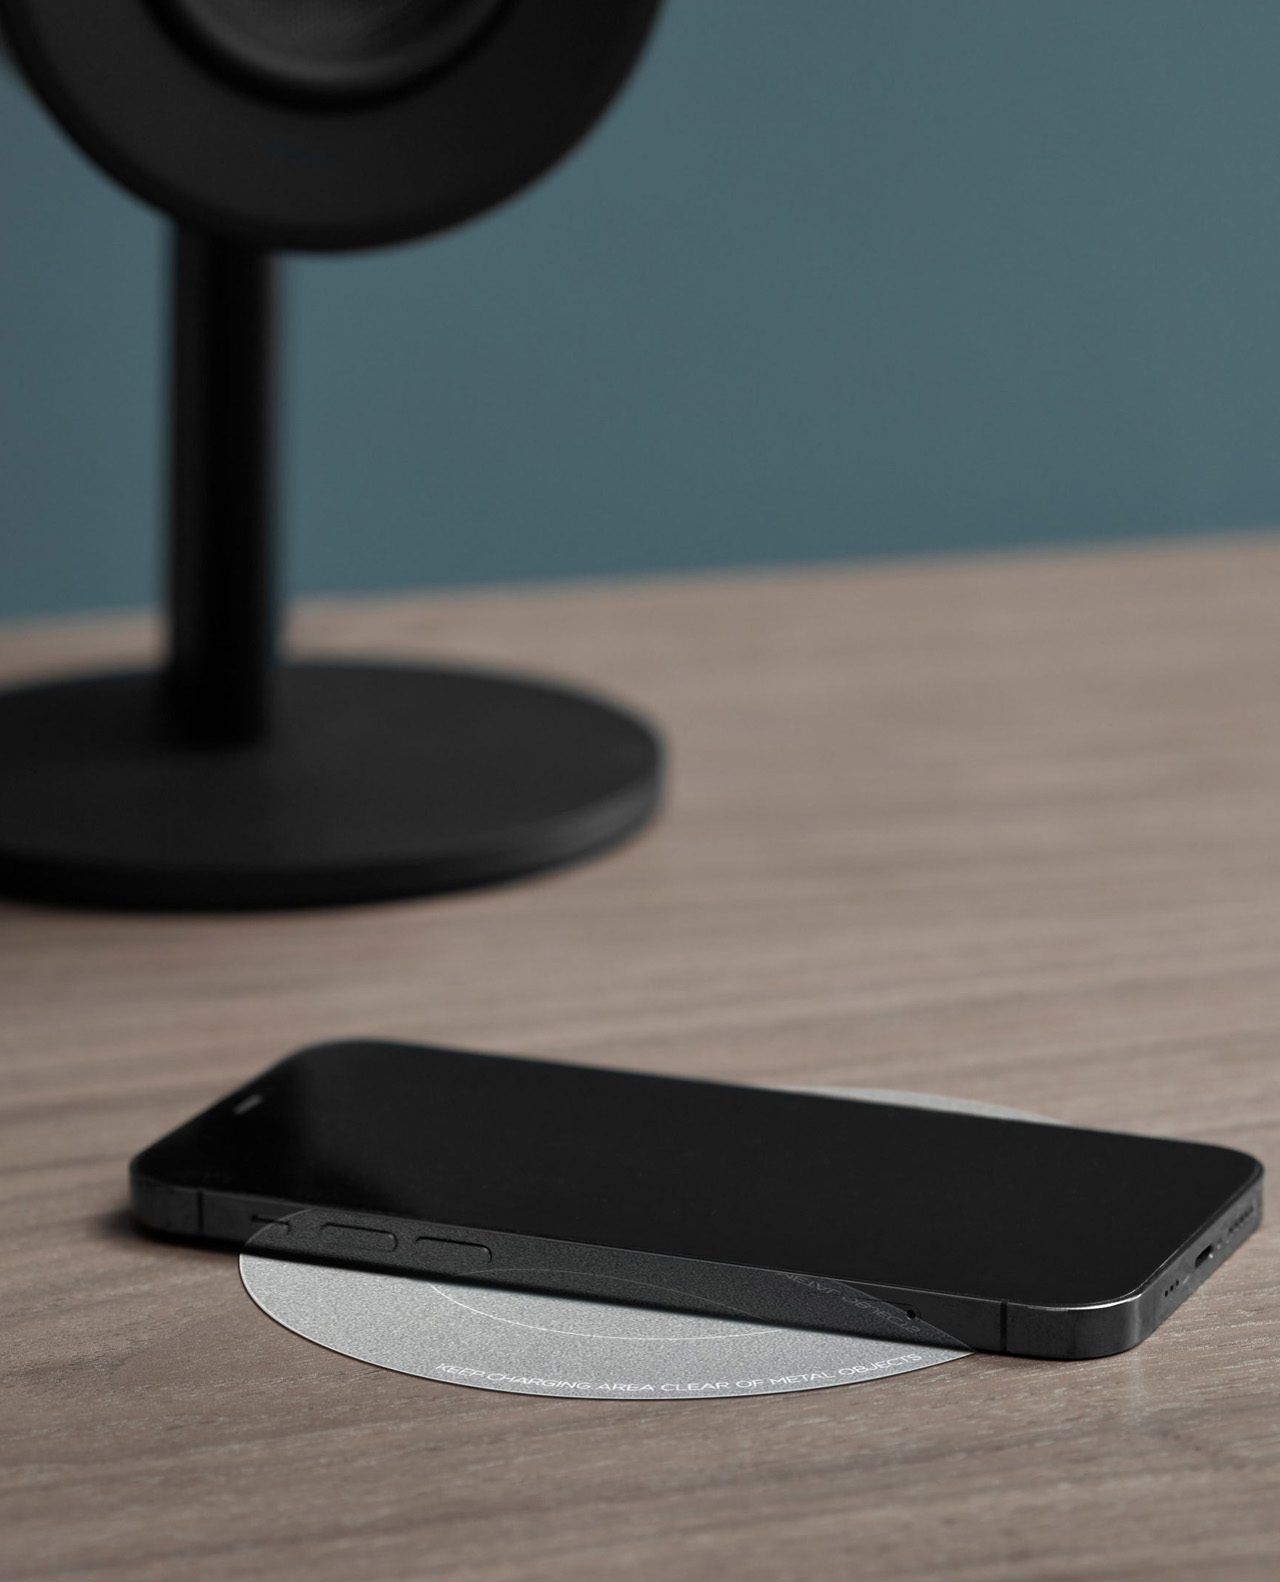 This tiny wireless charger is a convenient alternative to the Apple MagSafe Charger